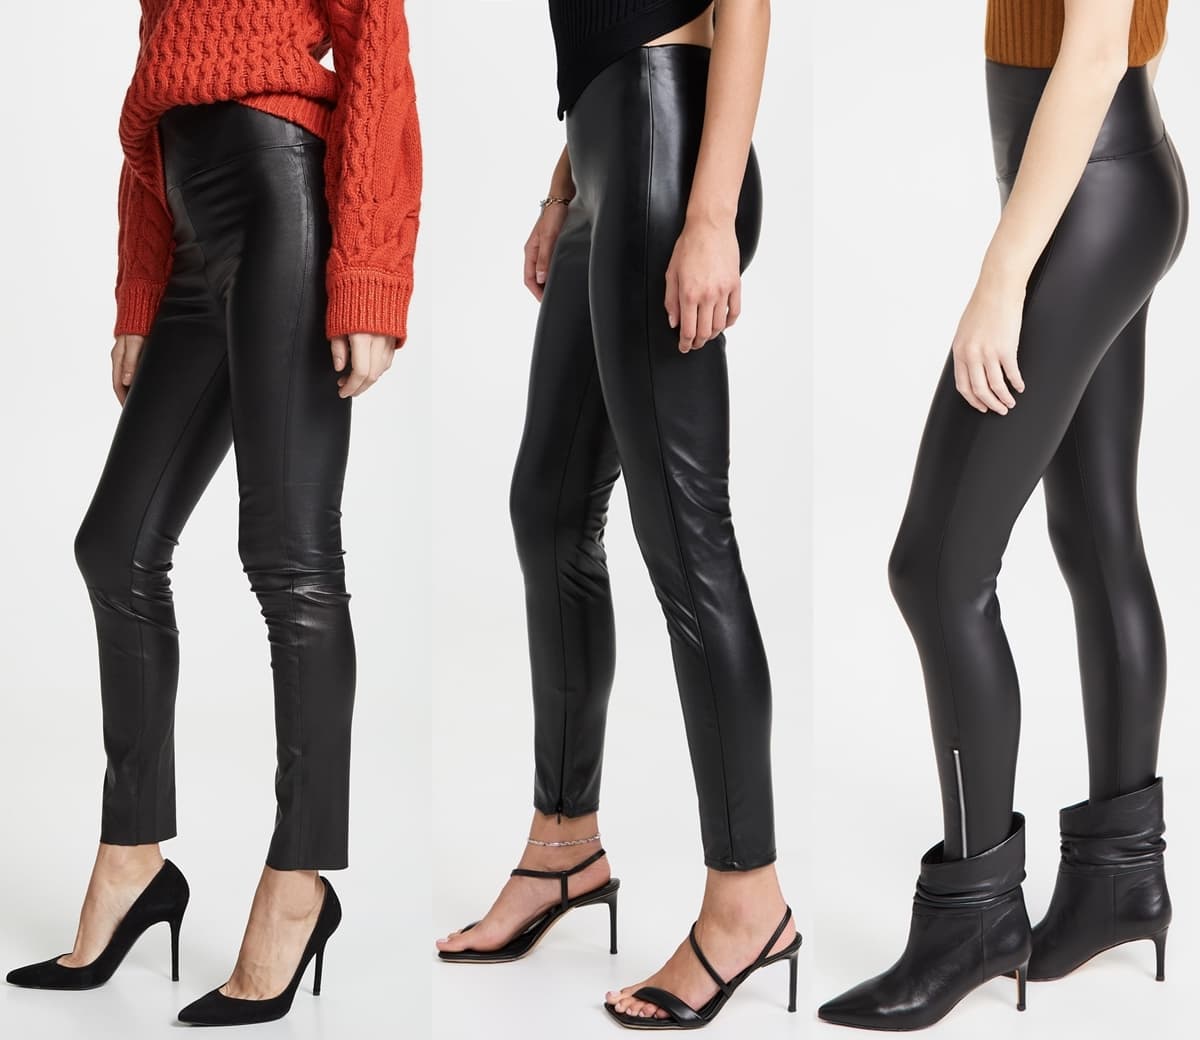 Elongate your legs while elevating your leggings look with high heel shoes